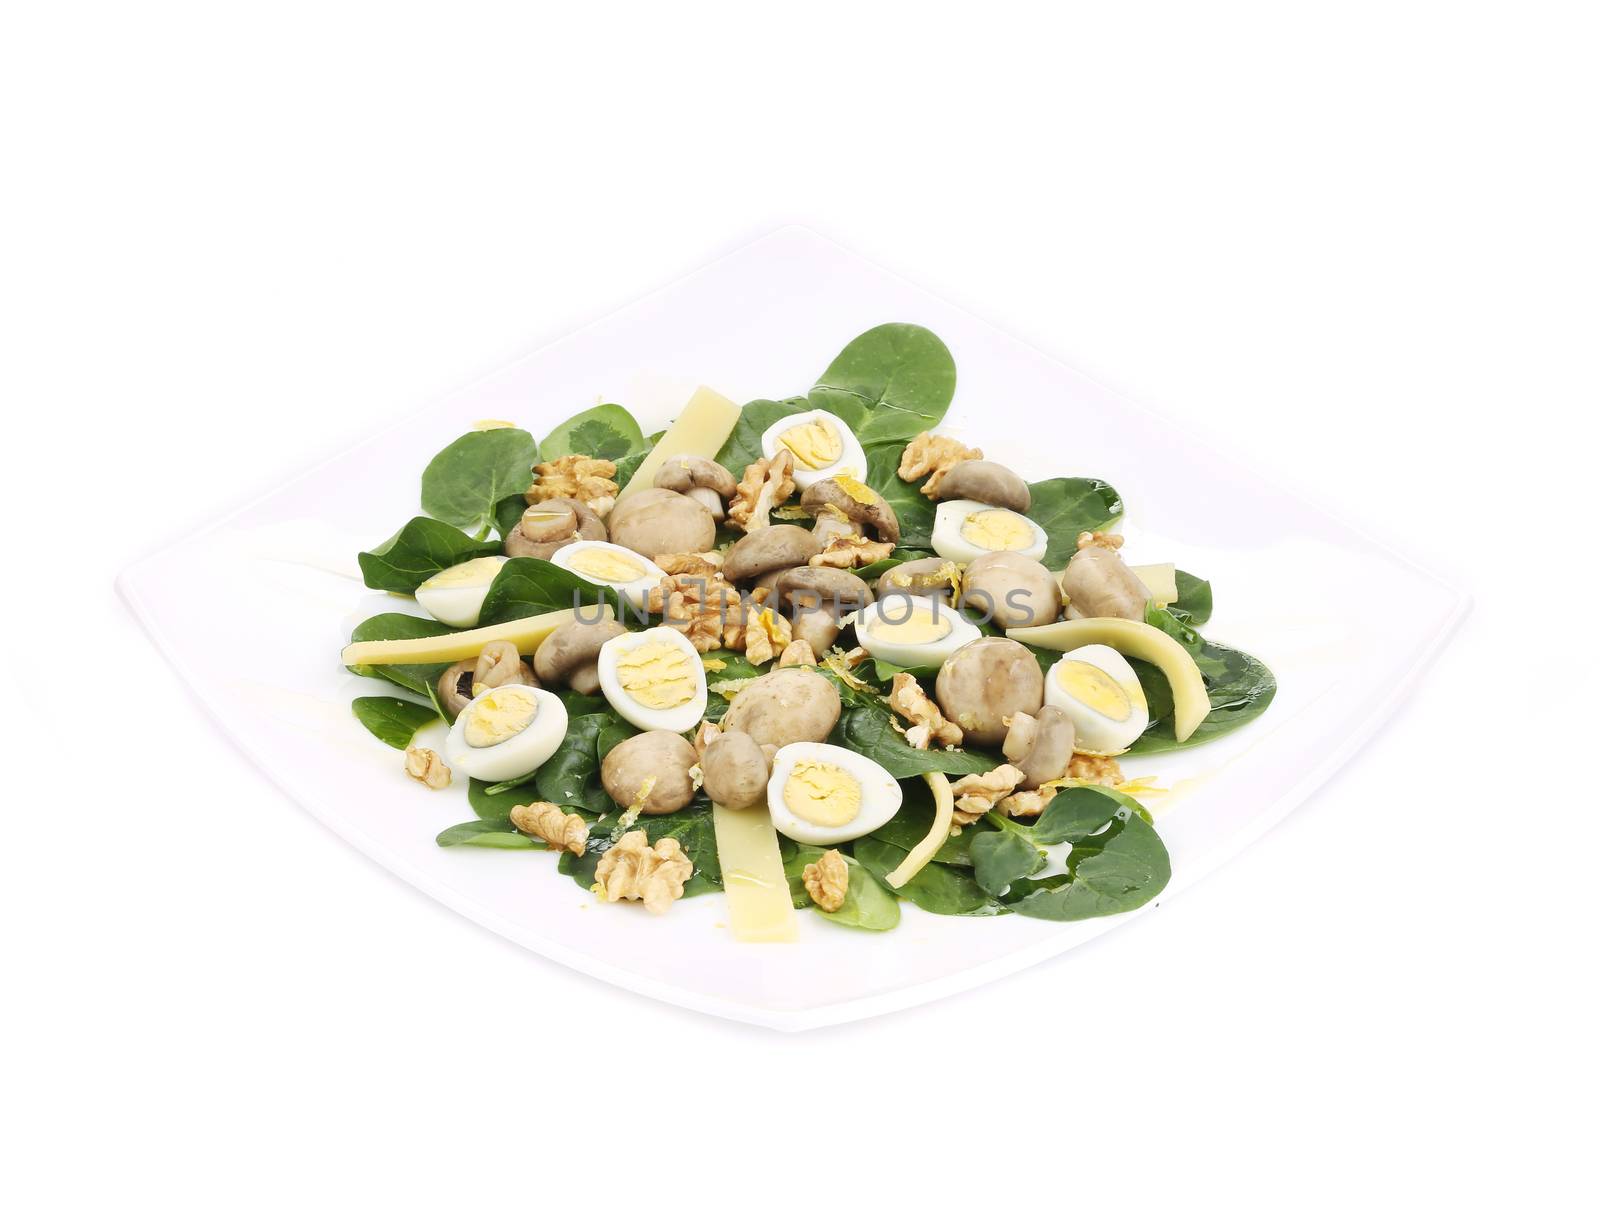 Mushroom salad with walnuts and parmesan. Isolated on a white background.